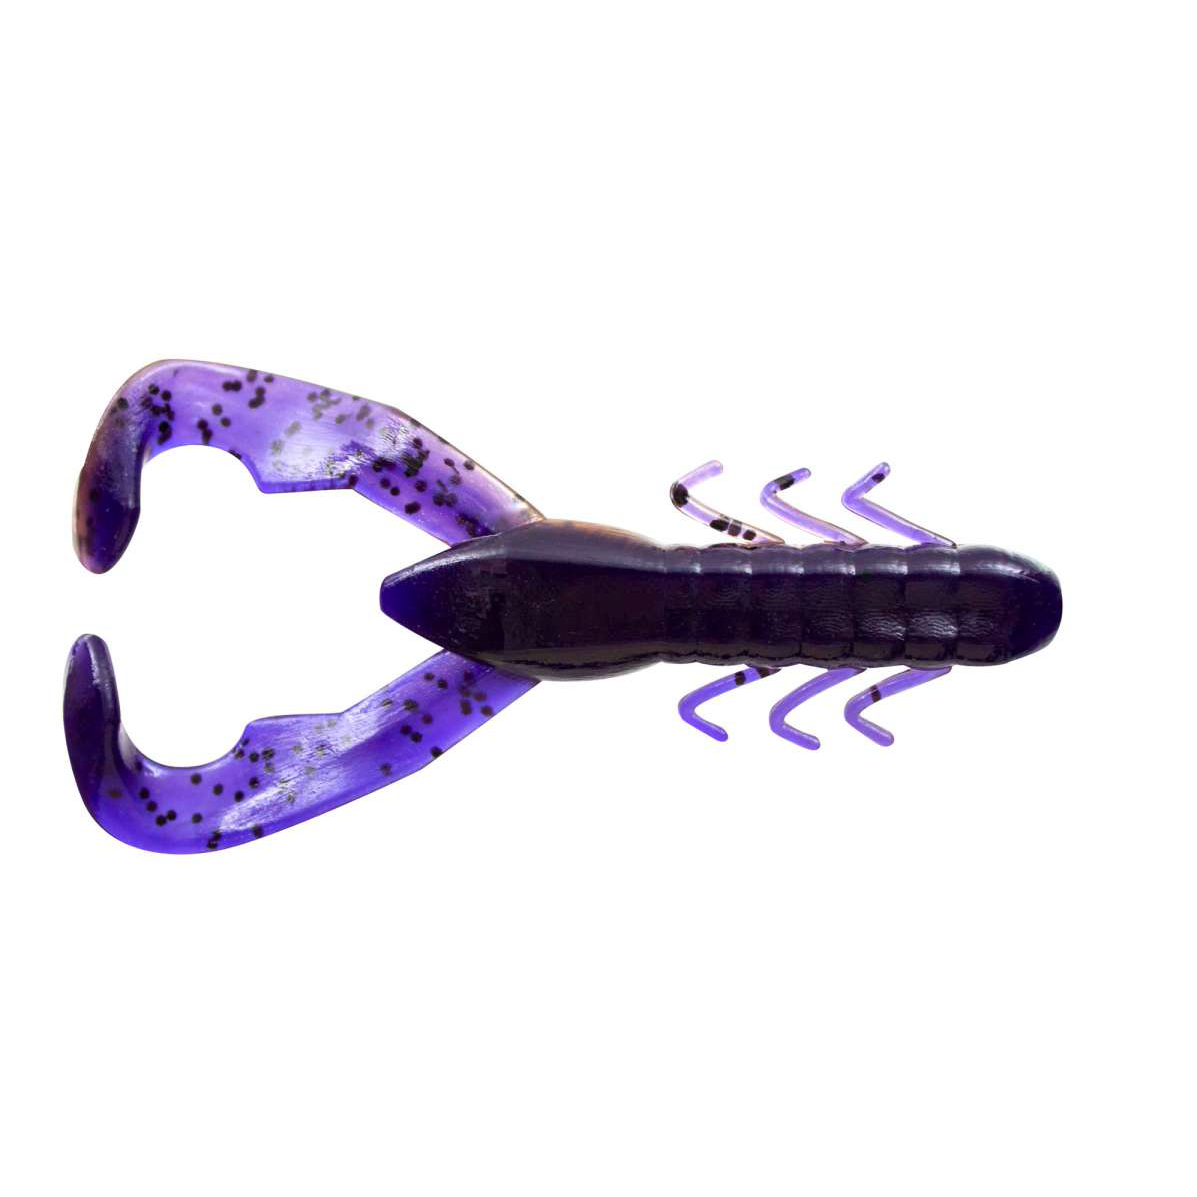 YUM Chrsitie Craw Soft Plastic Bait Fishing Lure - Great for Flipping and  Pitching and as a Jig Trailer, 3.5 Inch Length, 8 per Pack